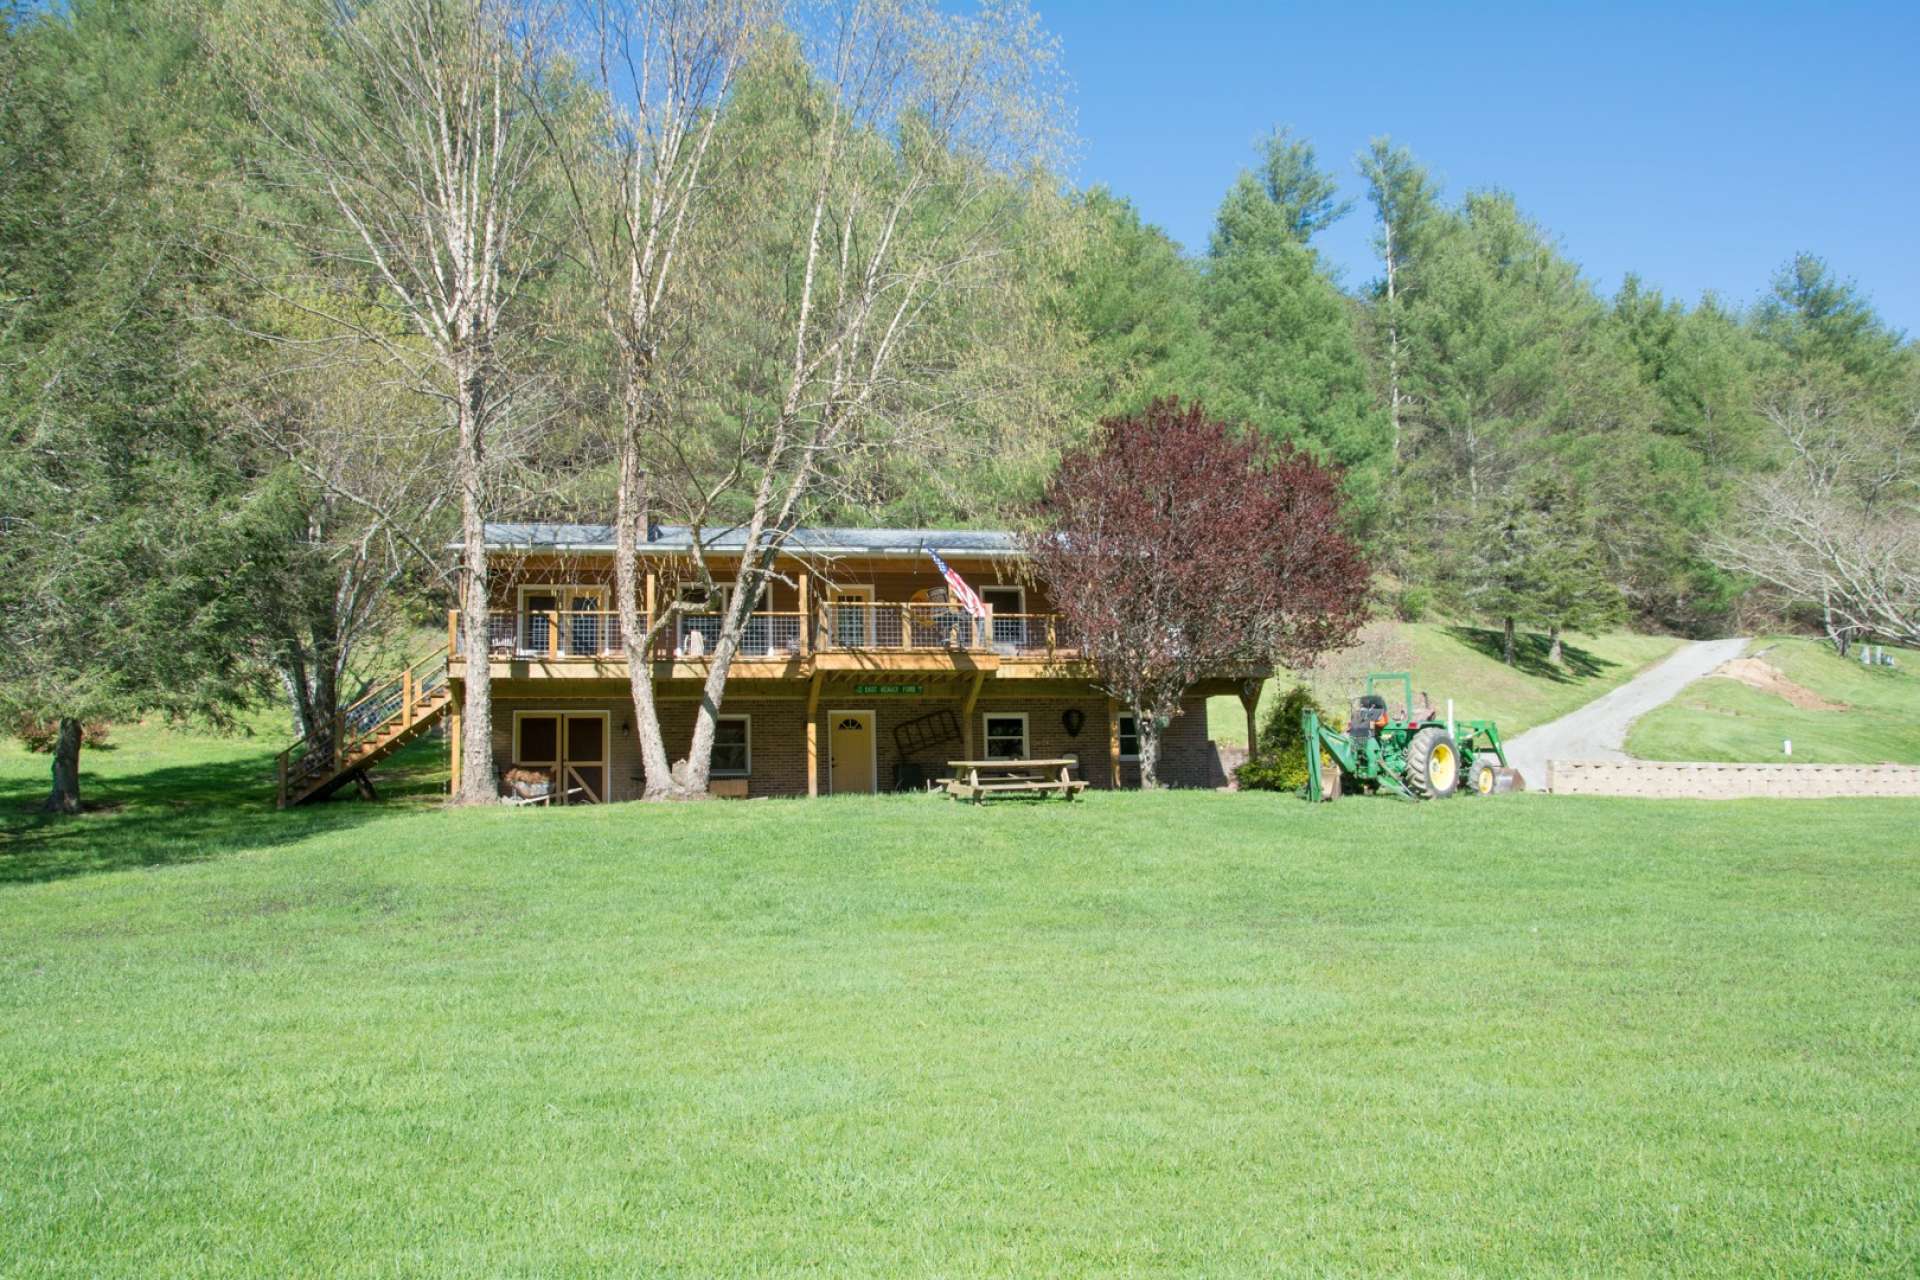 <b>Offered mostly furnished at $330,000, this cozy mountain home located on the banks of the New River in a private gated community in Piney Creek area of the Blue Ridge Mountains is ideal for your summer mountain retreat, vacation home with vacation rental history, or your primary residence.  Call us today for your private showing of this charming NC riverfront home.  Ask for information on Listing number P106</b>